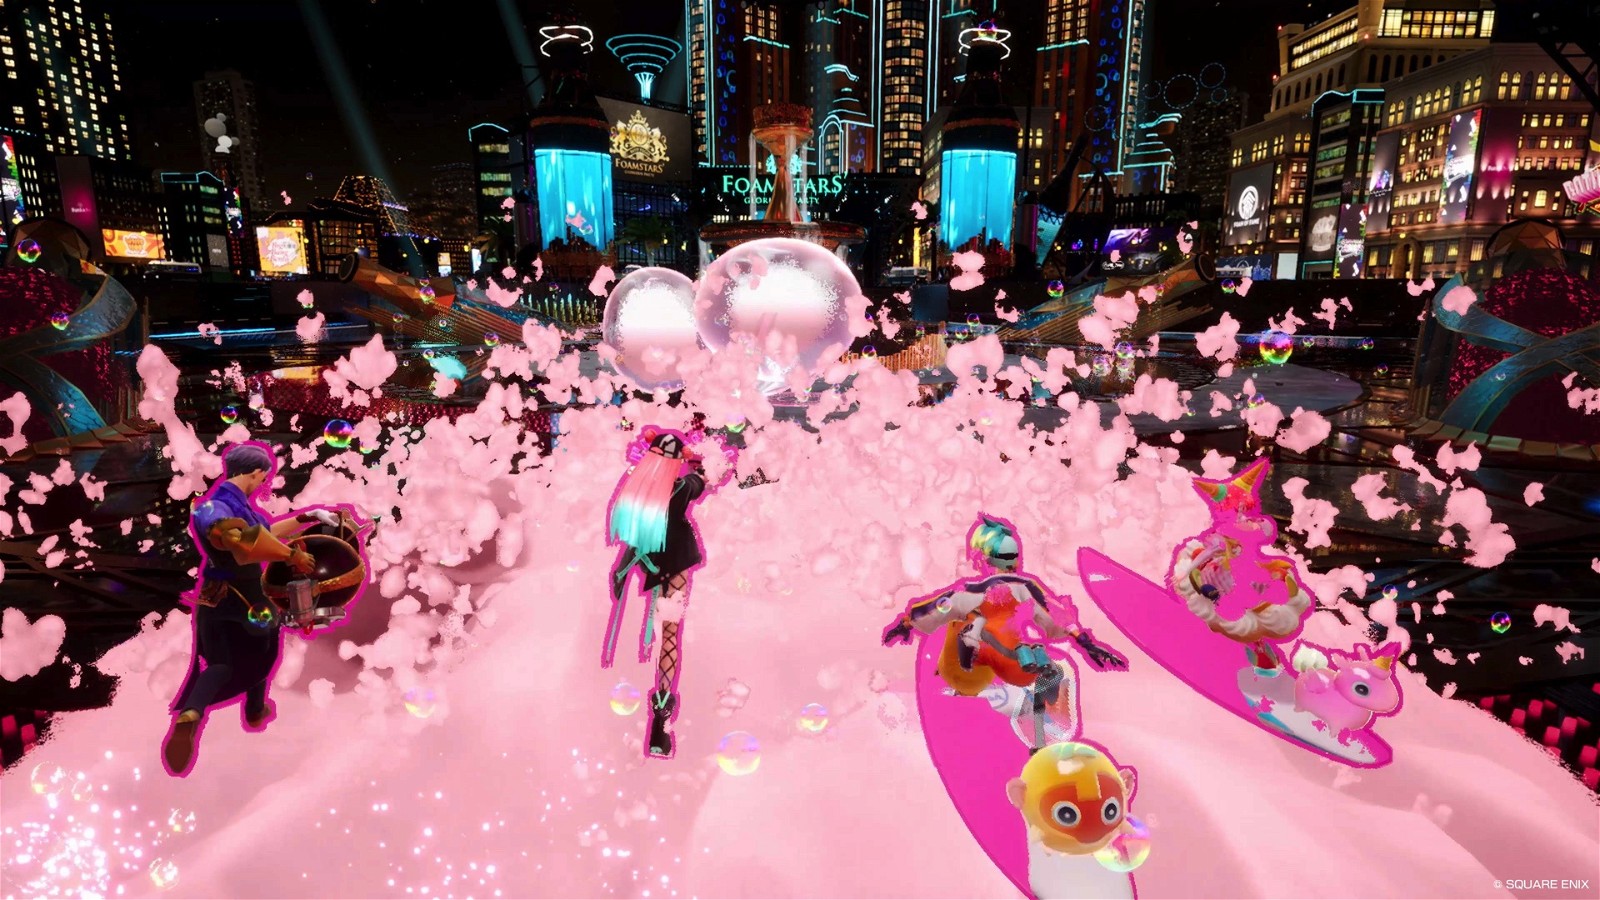 Gamers are comparing it with Nintendo's Splatoon.